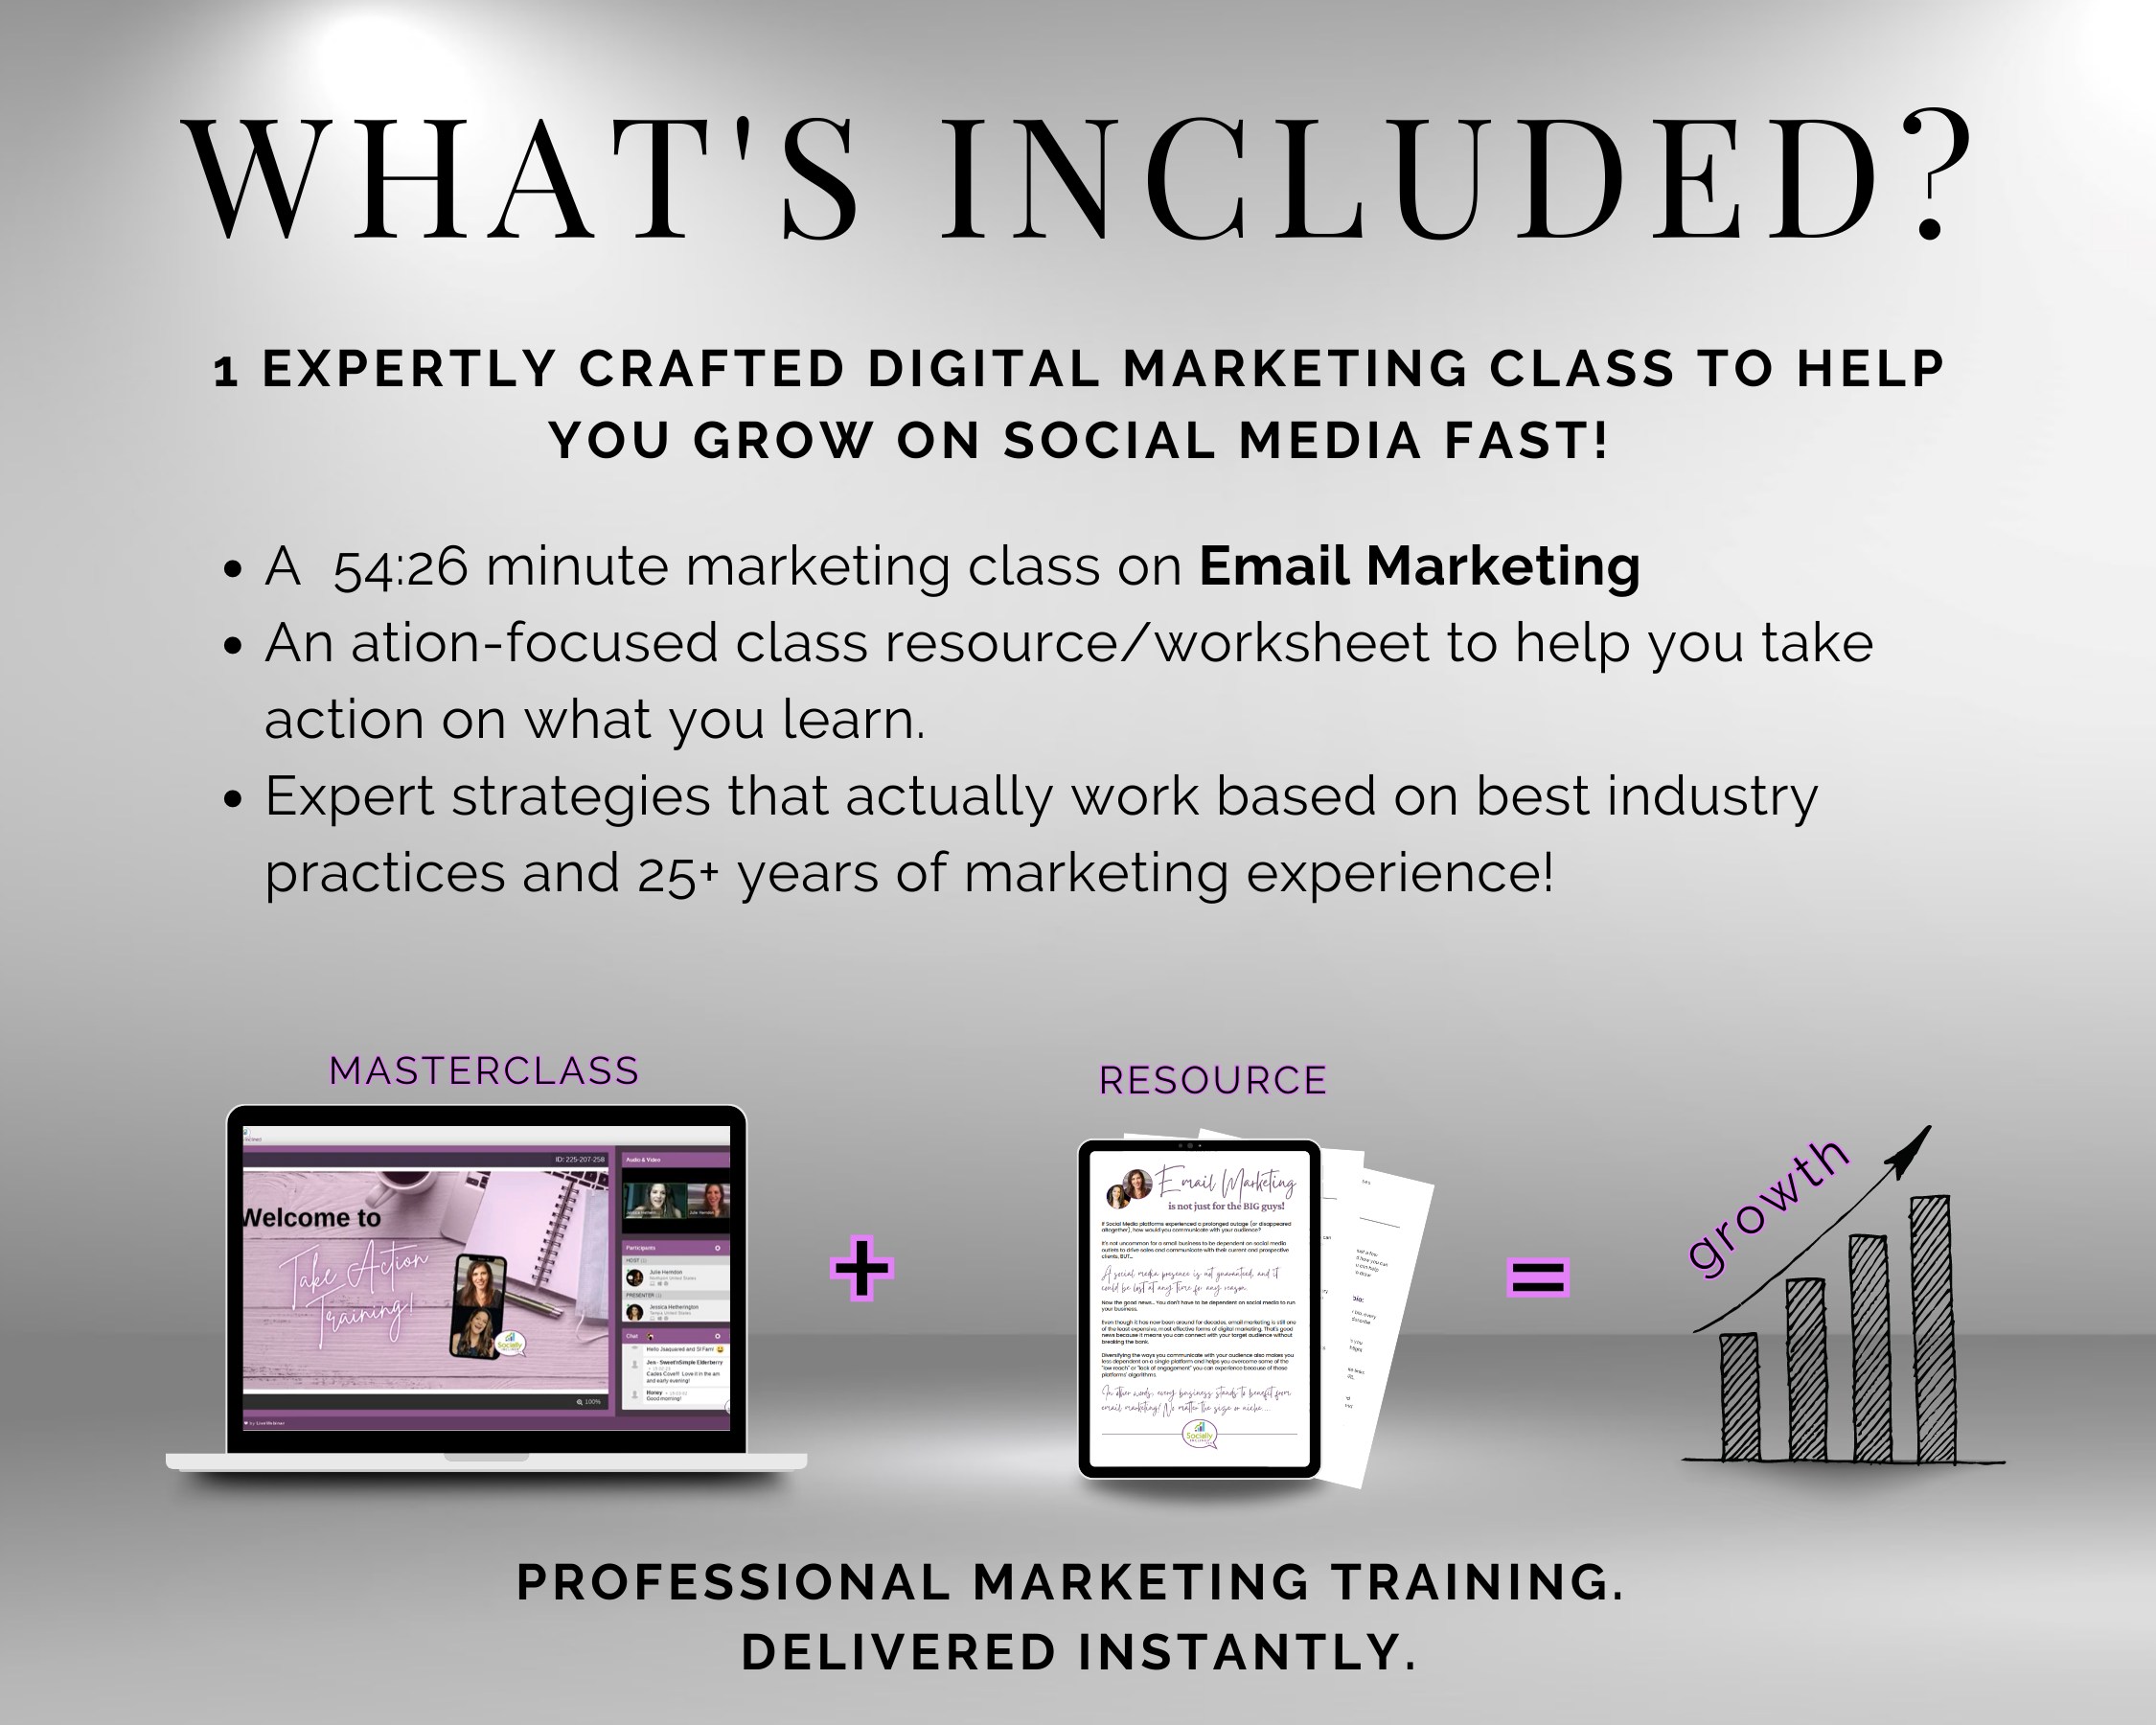 This Get Socially Inclined digital marketing class includes training on TAT - Email Marketing 101 Masterclass.